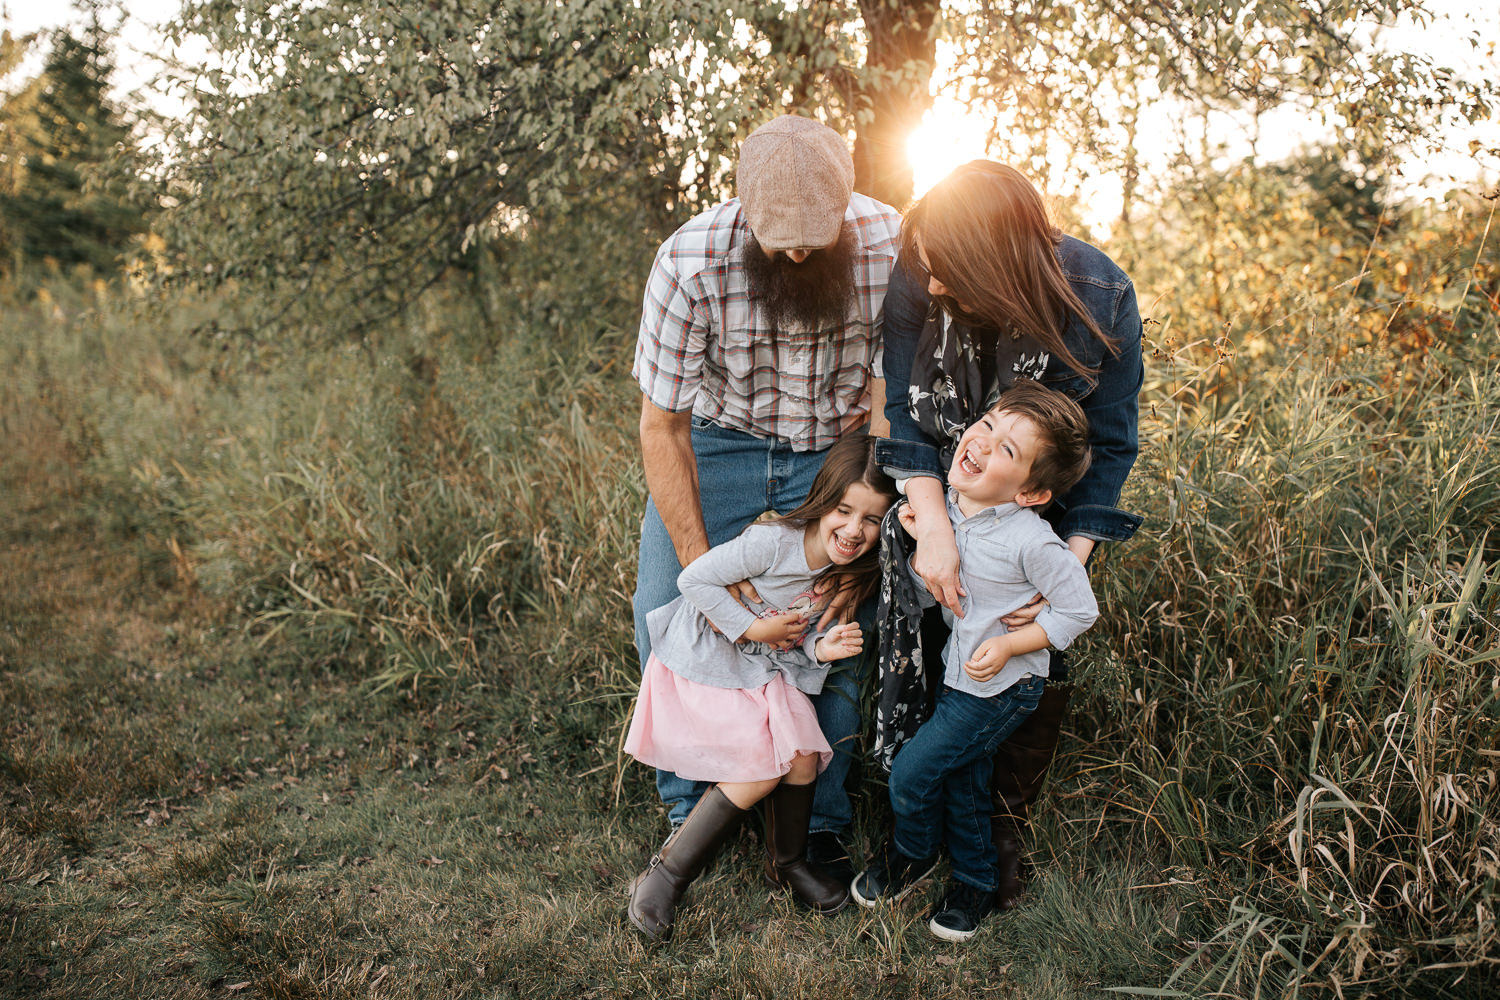 family of 4 standing together in grass field in front of tree, mom and dad leaning over, father tickling 5 year old daughter and mother tickling son, kids laughing - York Region Lifestyle Photography